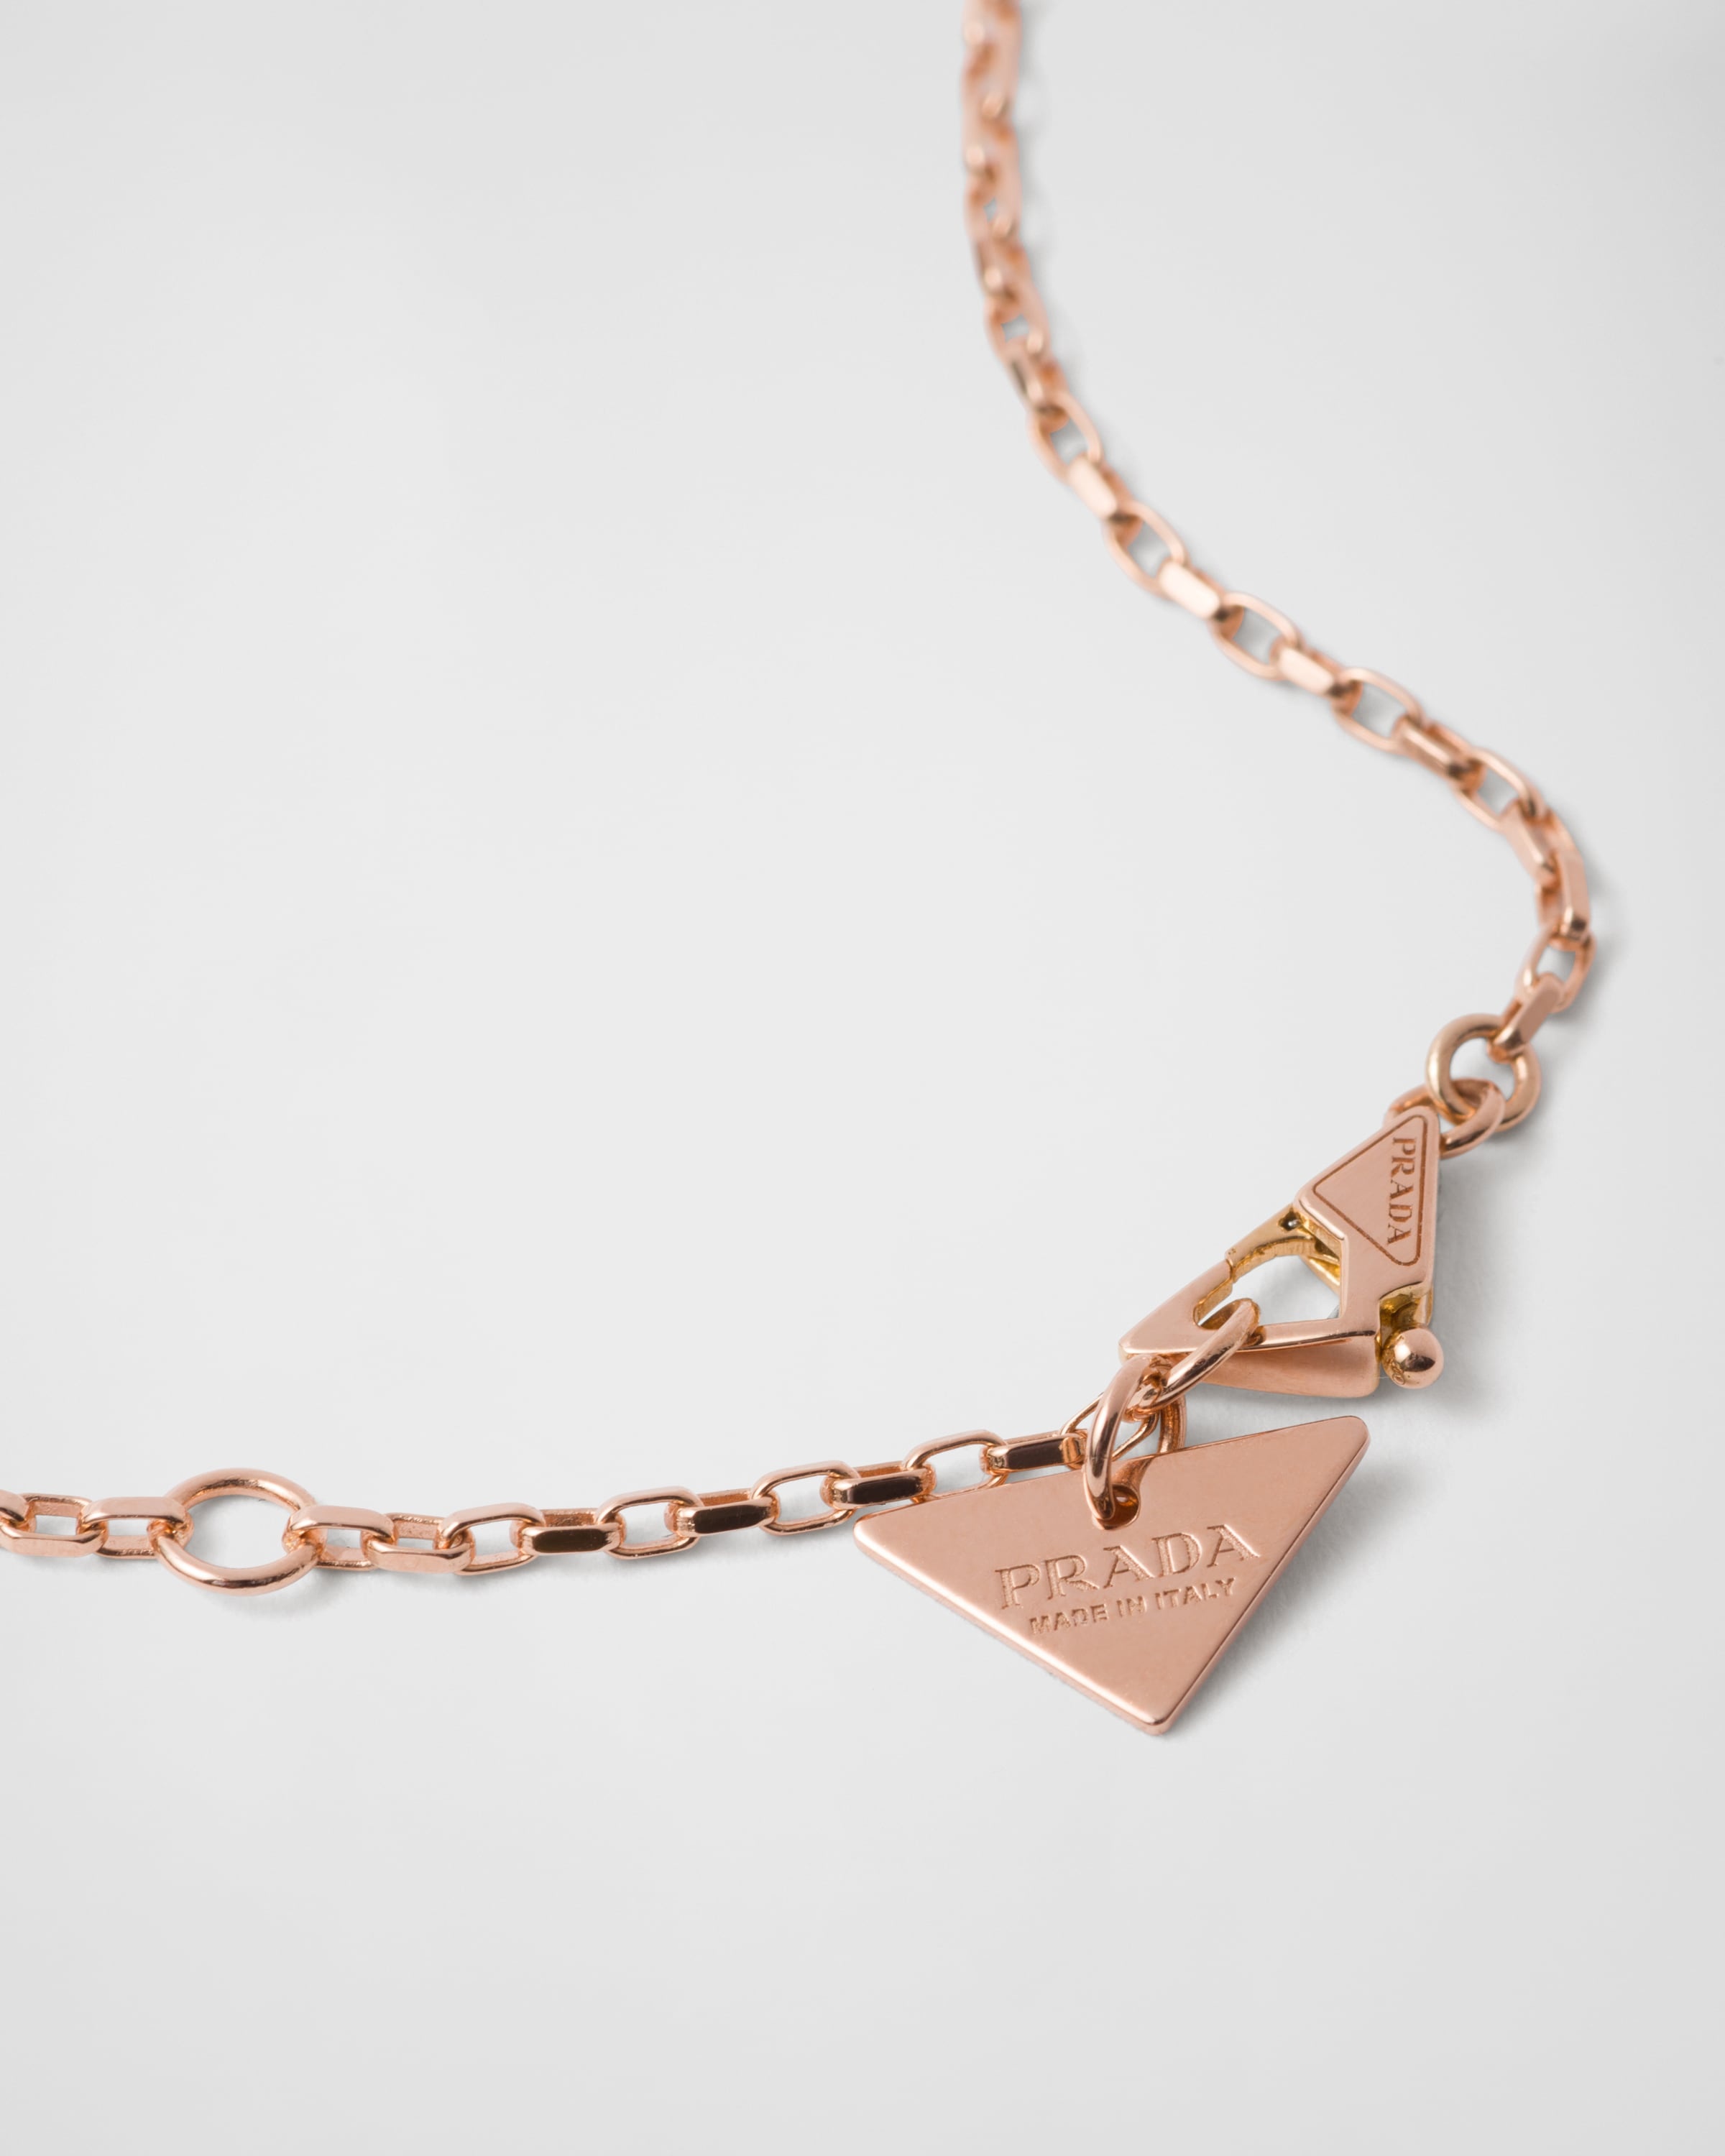 Eternal Gold necklace in pink gold with nano triangle pendant - 5